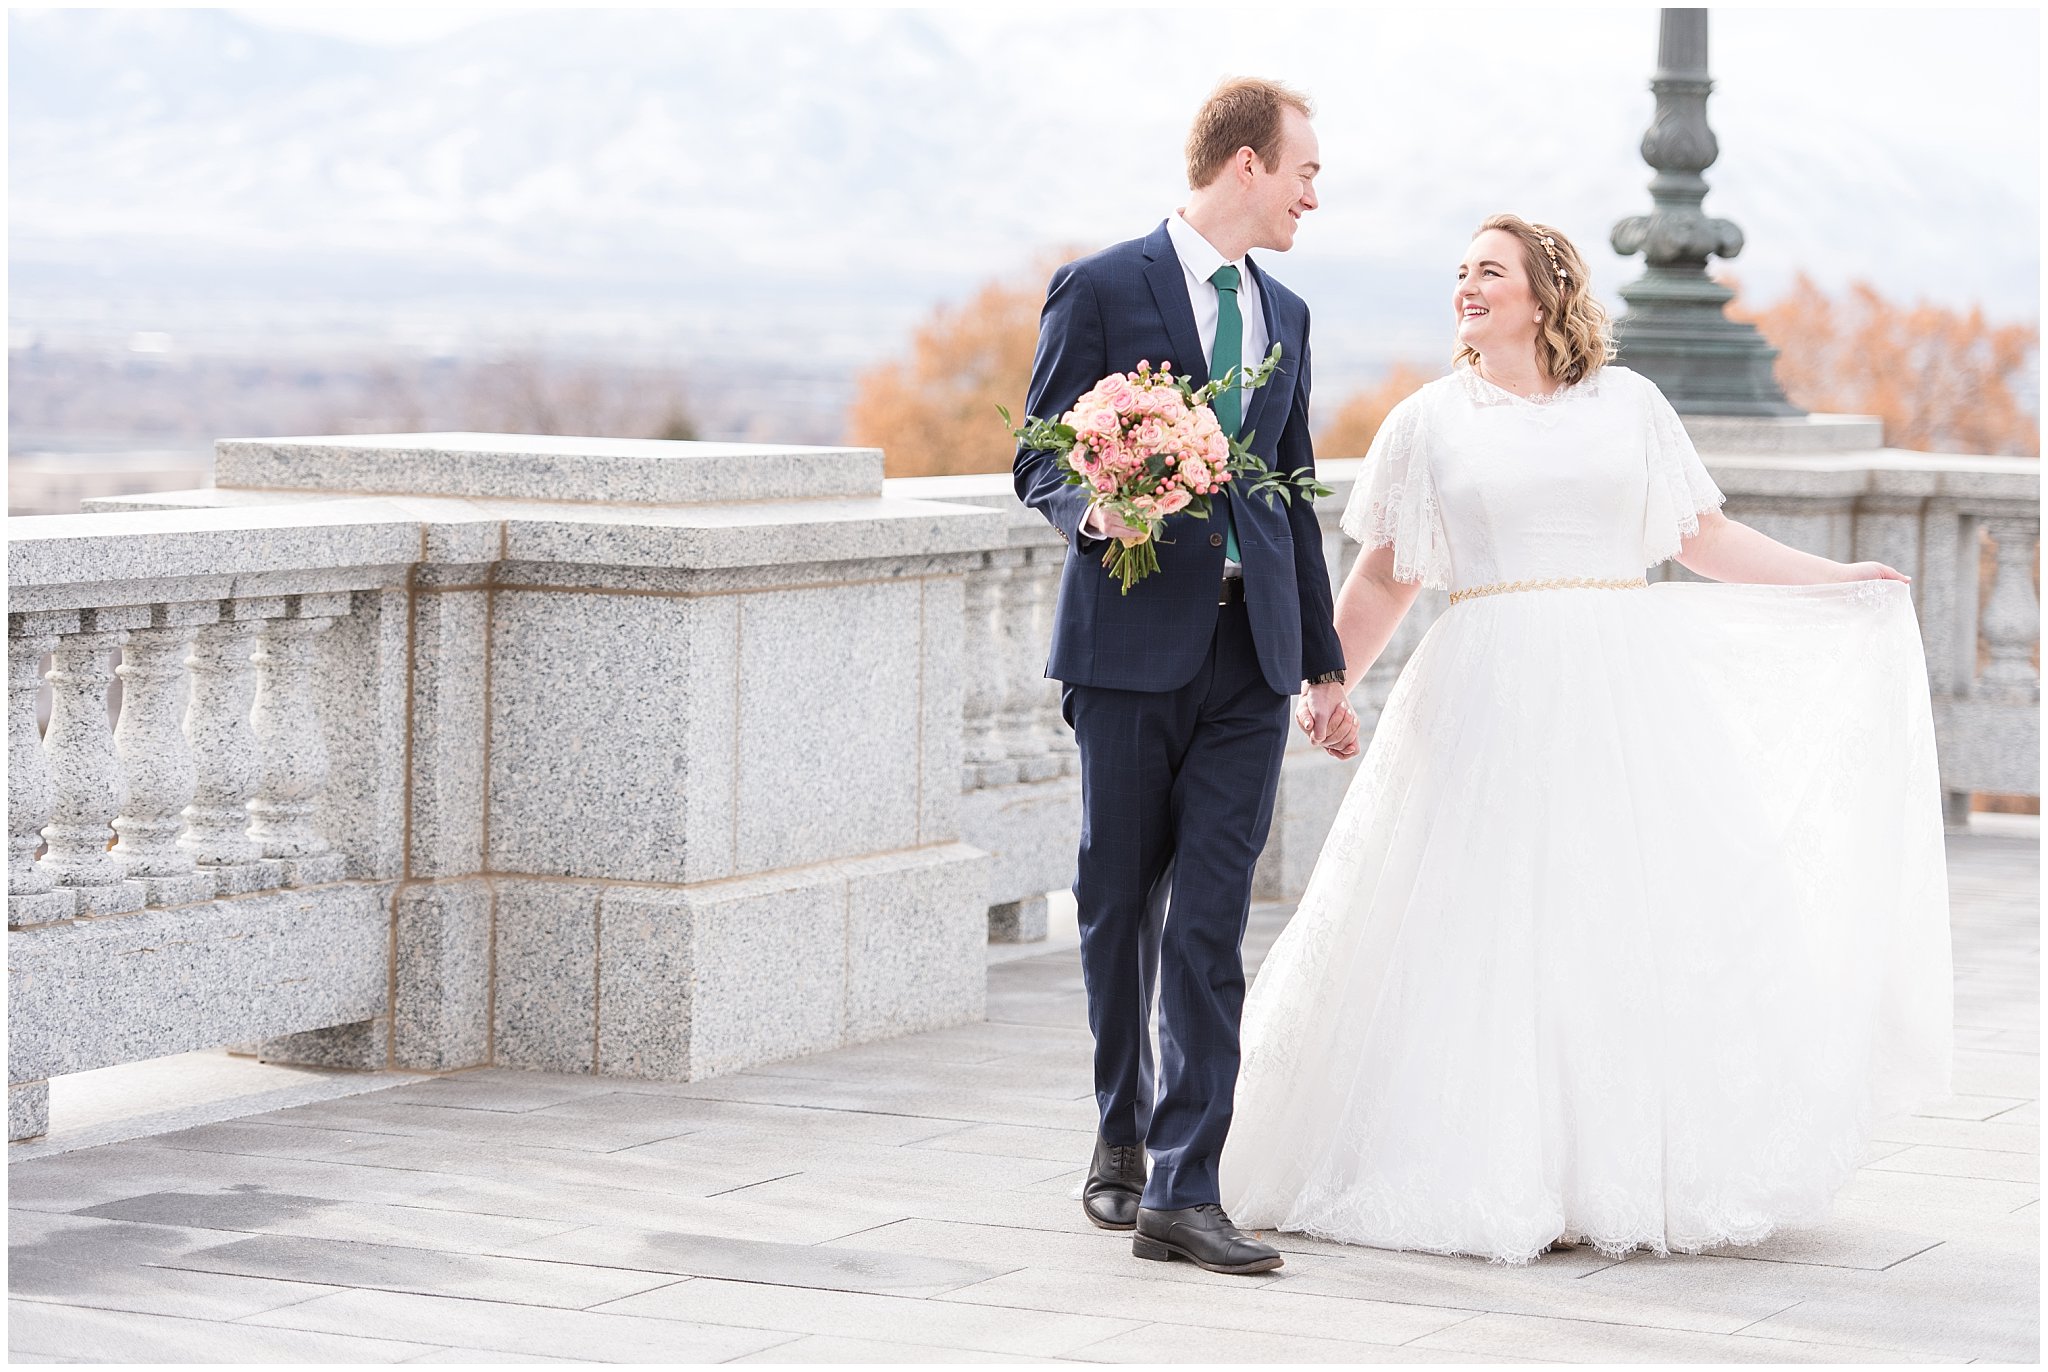 Bride and groom walking while groom holds bouquet | Winter Formals at the Utah State Capitol | Utah Wedding Photography